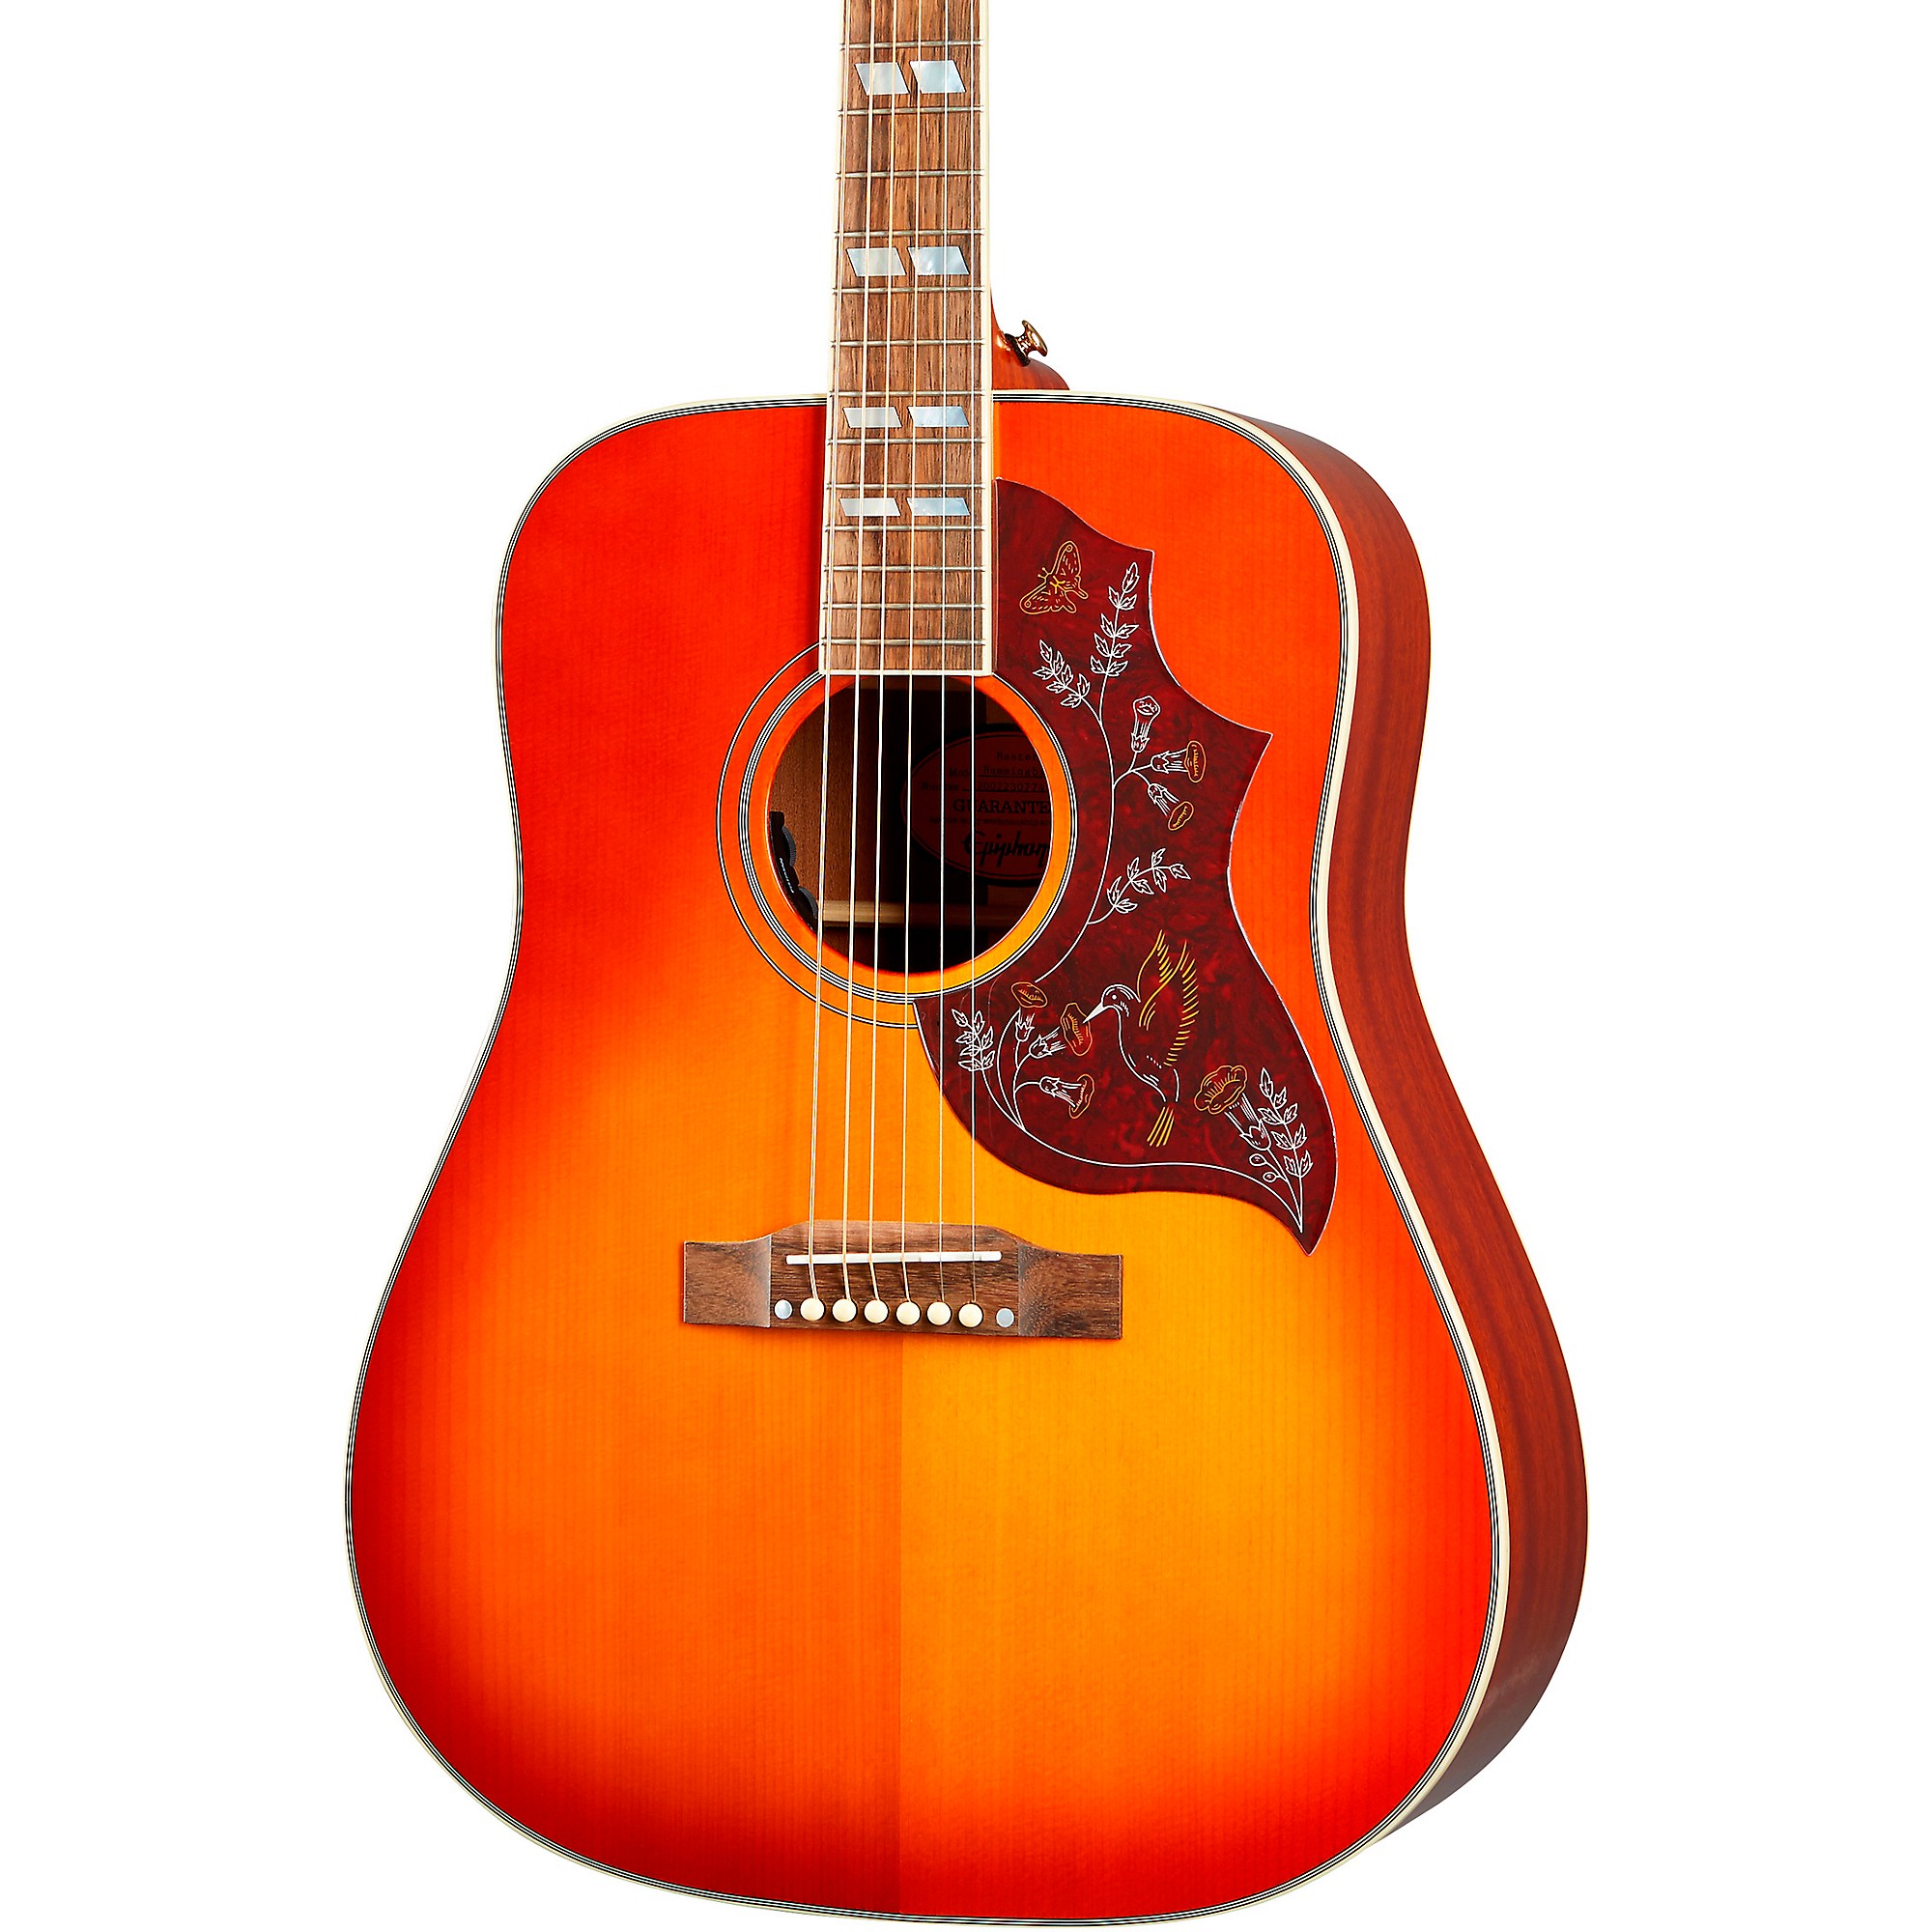 Epiphone Inspired by Gibson Hummingbird Acoustic-Electric Guitar Aged  Cherry Sunburst